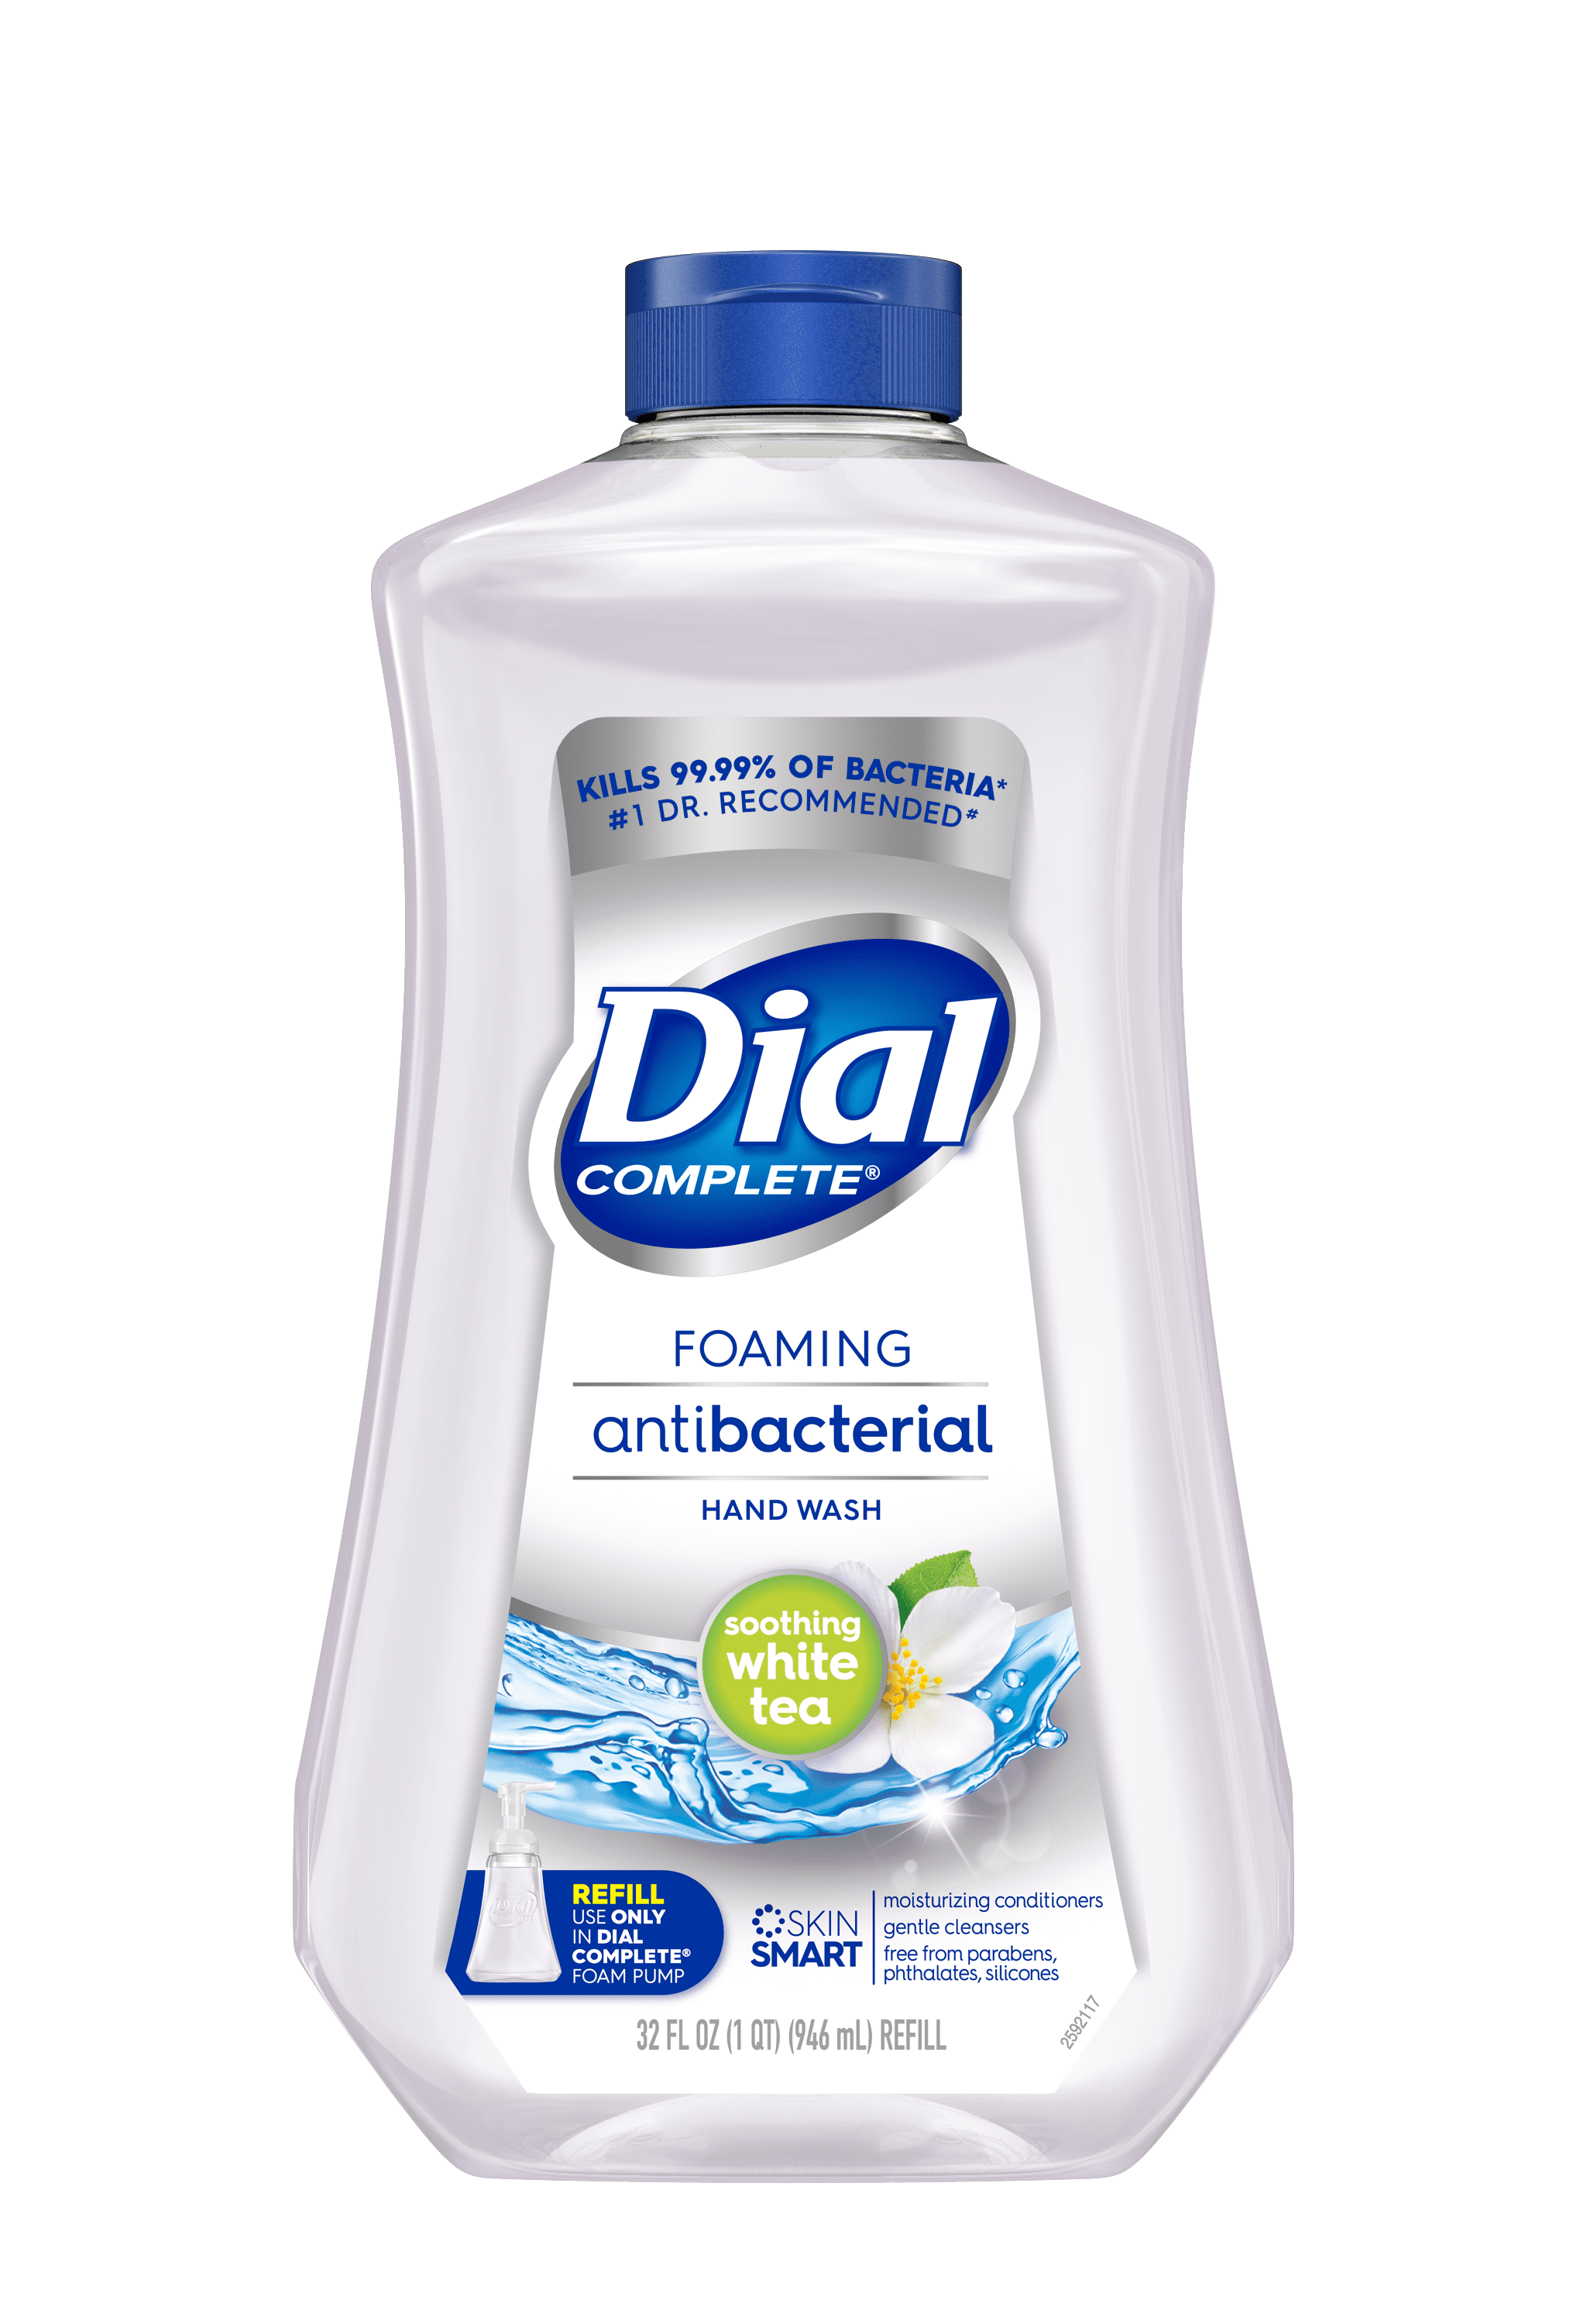 Dial Complete Antibacterial Foaming Hand Wash Refill, Soothing White